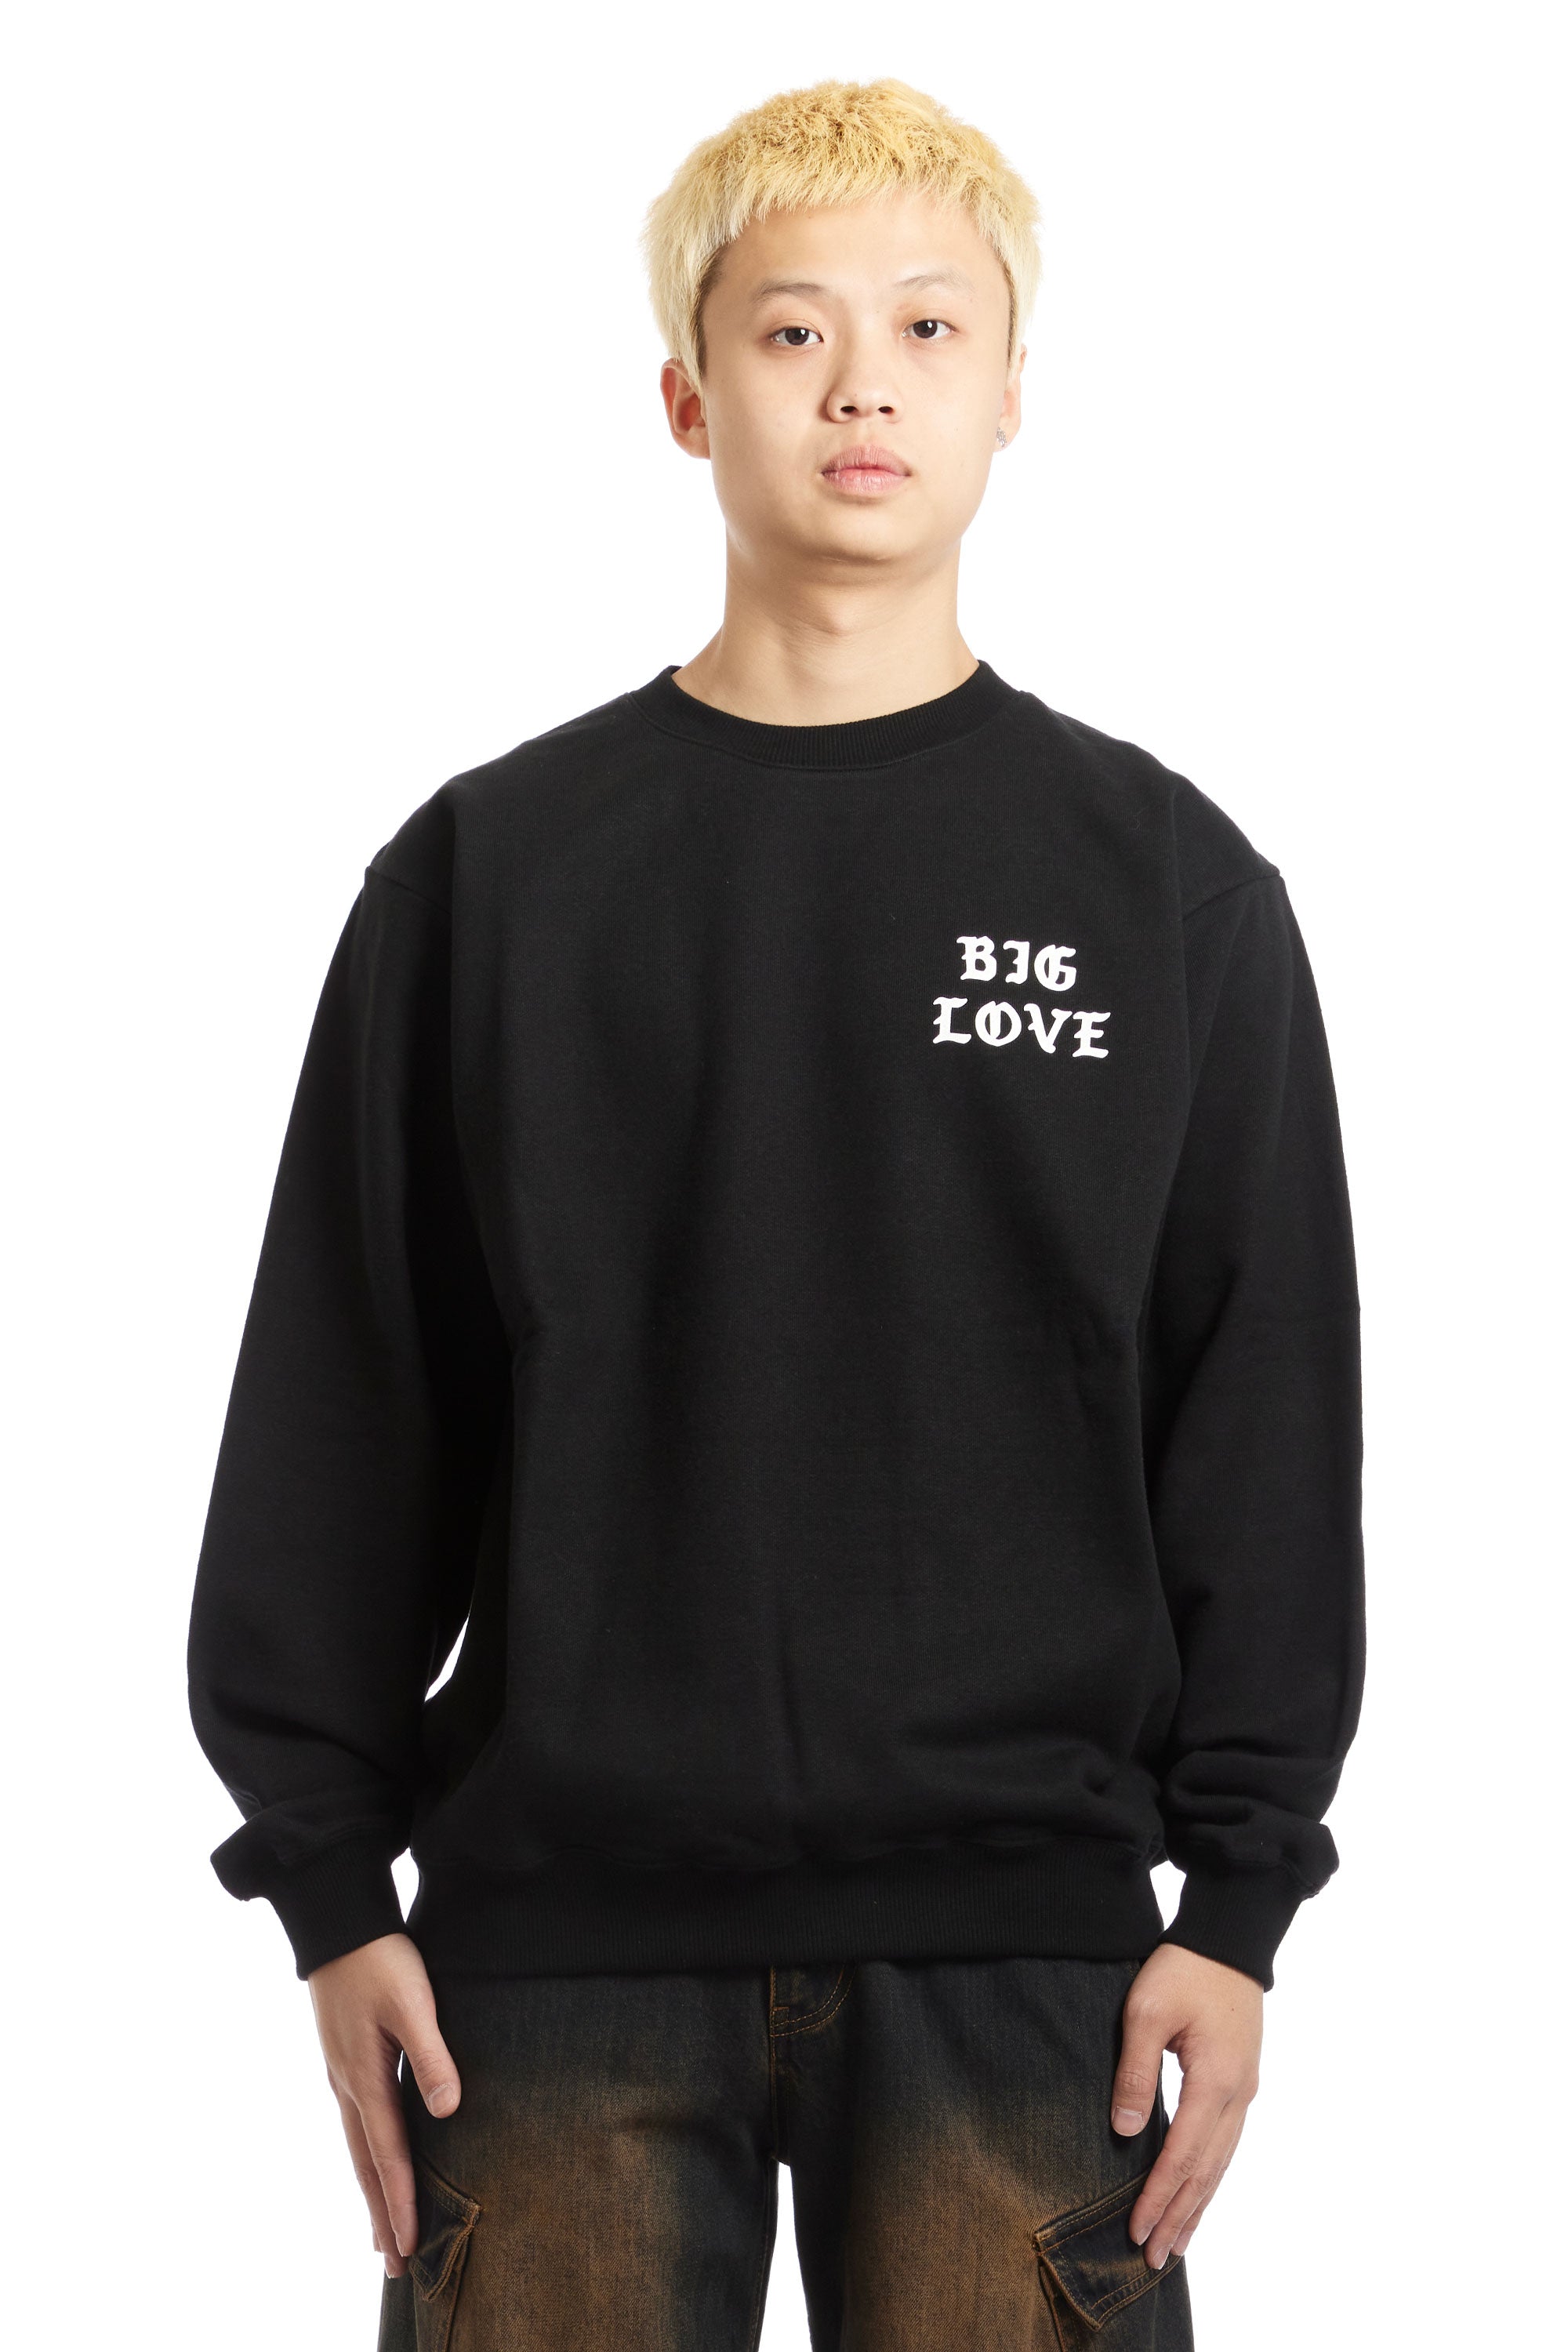 The BIG LOVE RECORDS - BLACK CLASSIC SWEATSHIRT  available online with global shipping, and in PAM Stores Melbourne and Sydney.